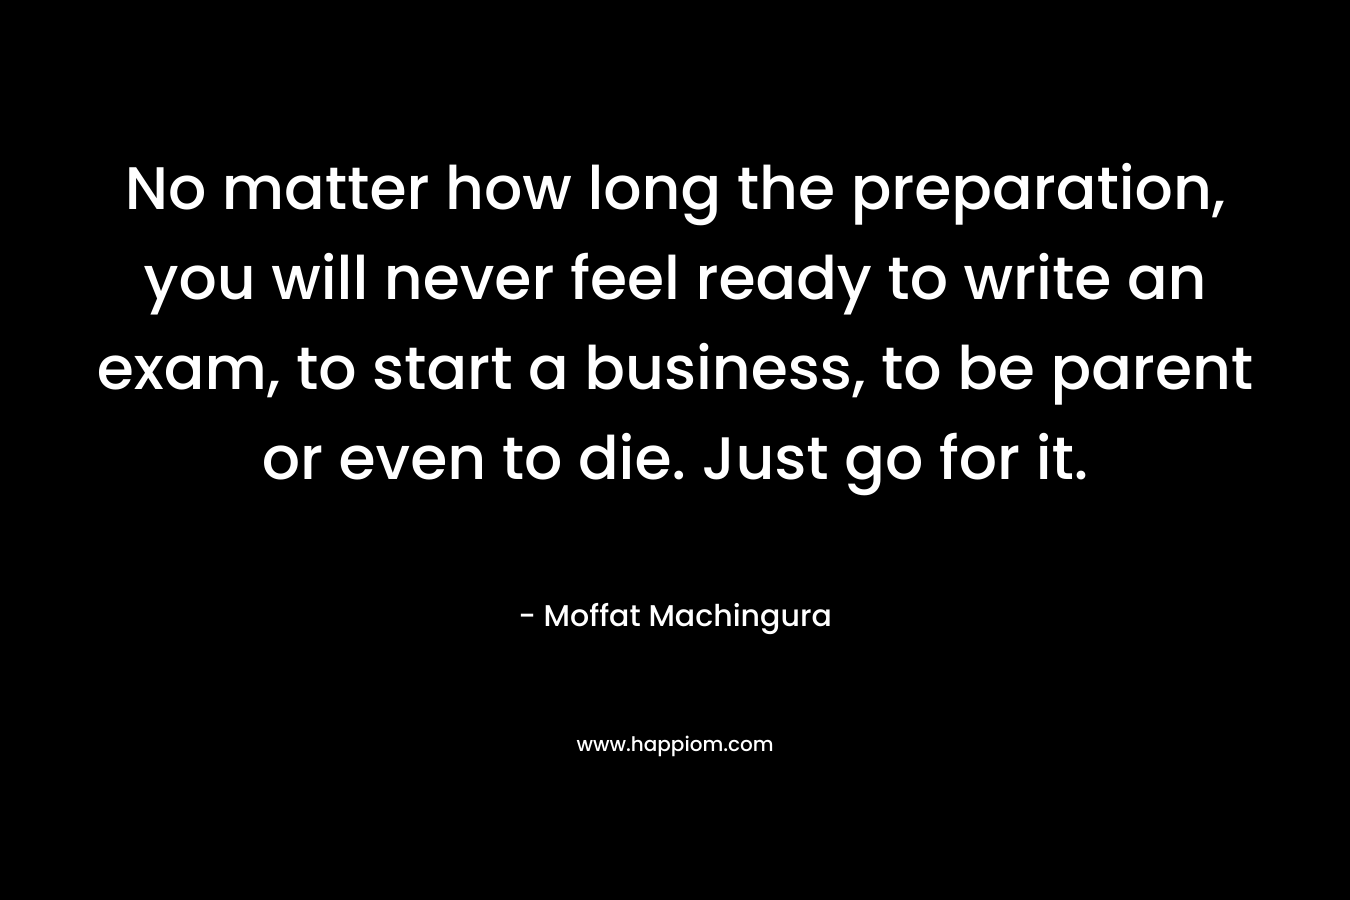 No matter how long the preparation, you will never feel ready to write an exam, to start a business, to be parent or even to die. Just go for it. – Moffat Machingura